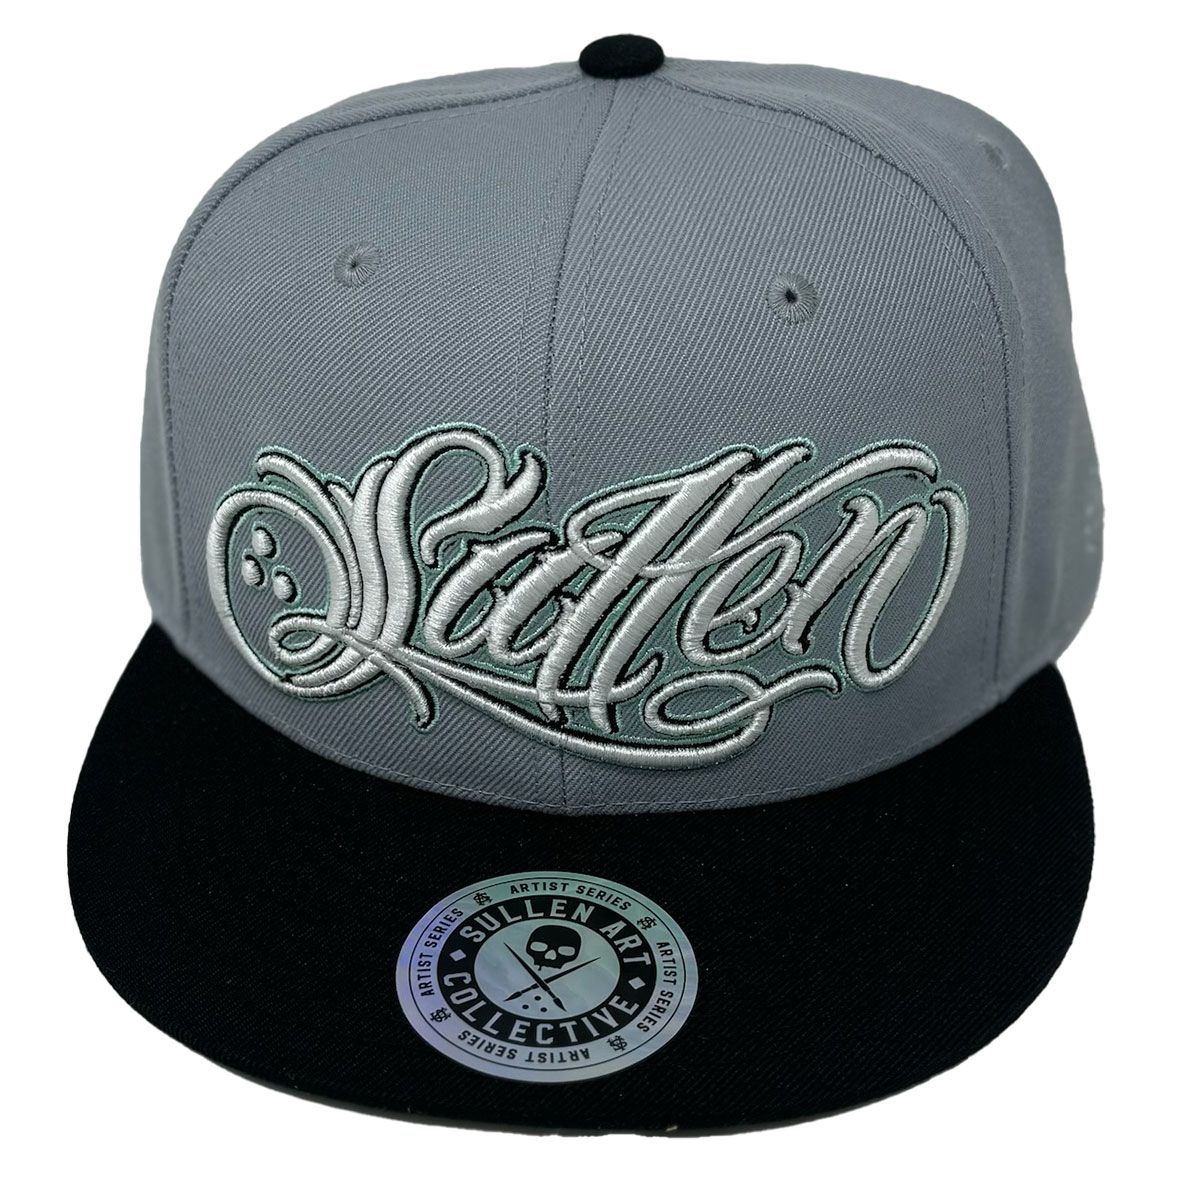 SULLEN ART COLLECTIVE BUTTERY SNAPBACK - HAT - Synik Clothing - synikclothing.com